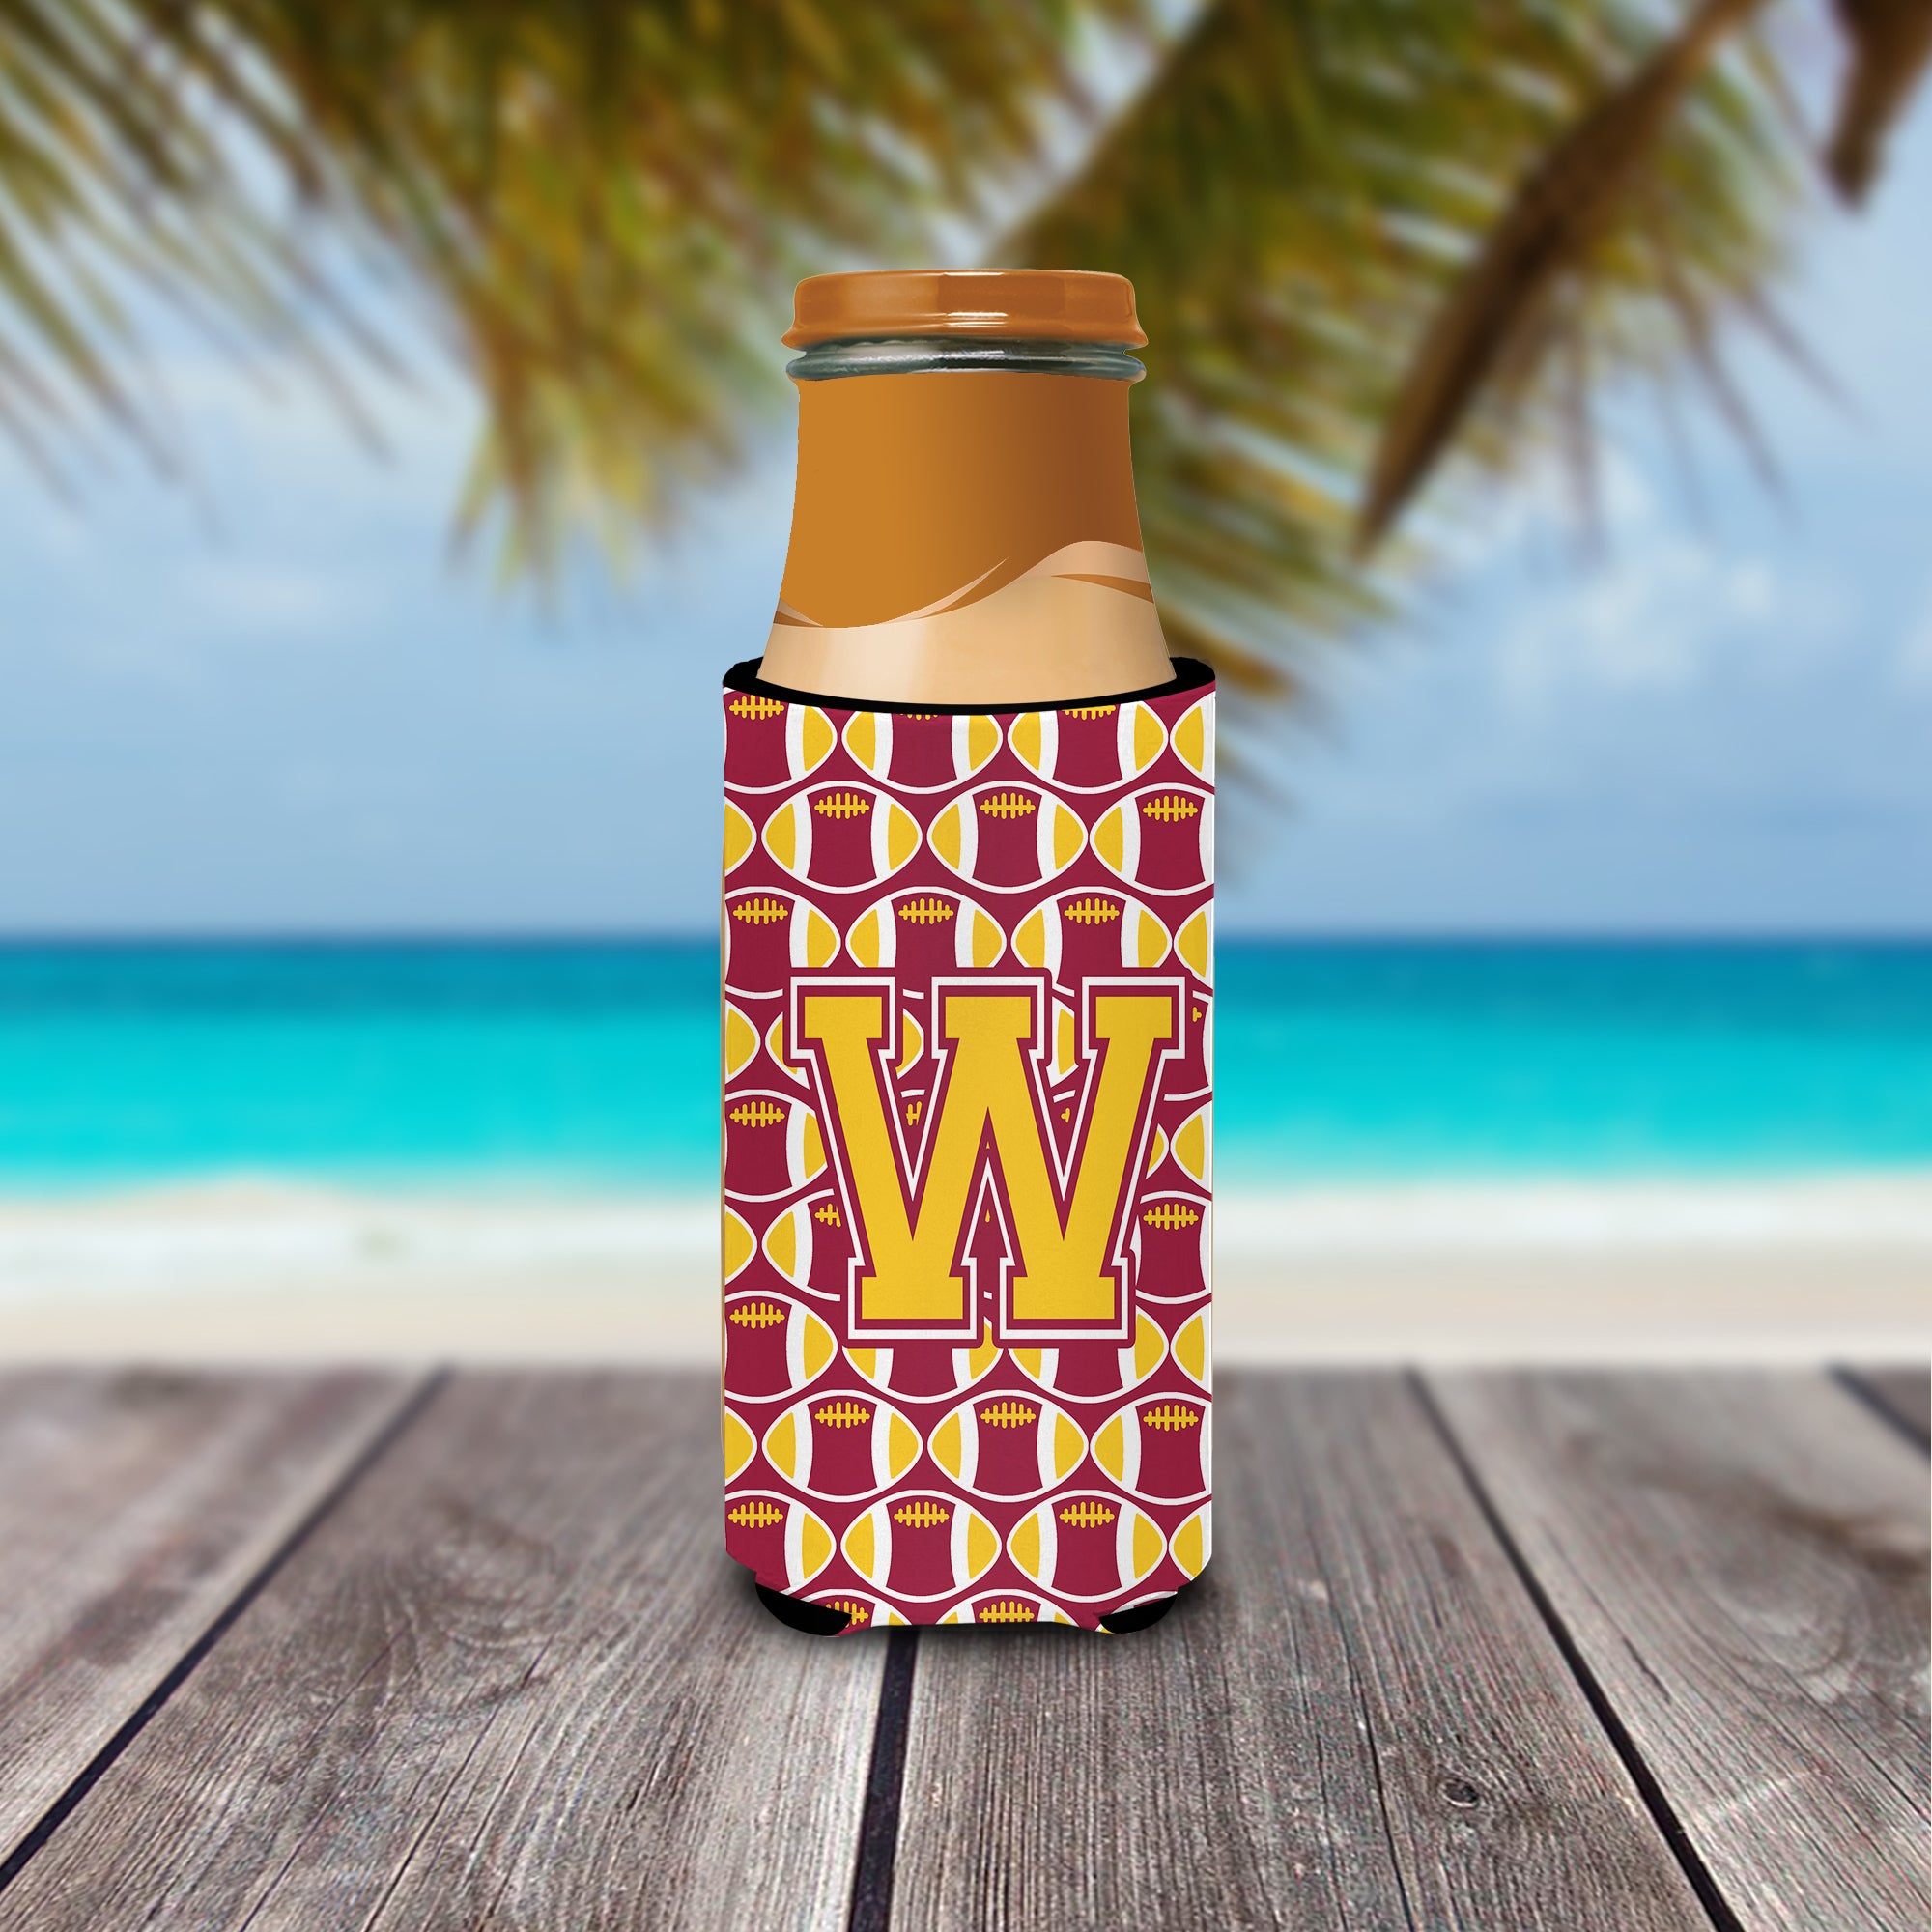 Letter W Football Maroon and Gold Ultra Beverage Insulators for slim cans CJ1081-WMUK.